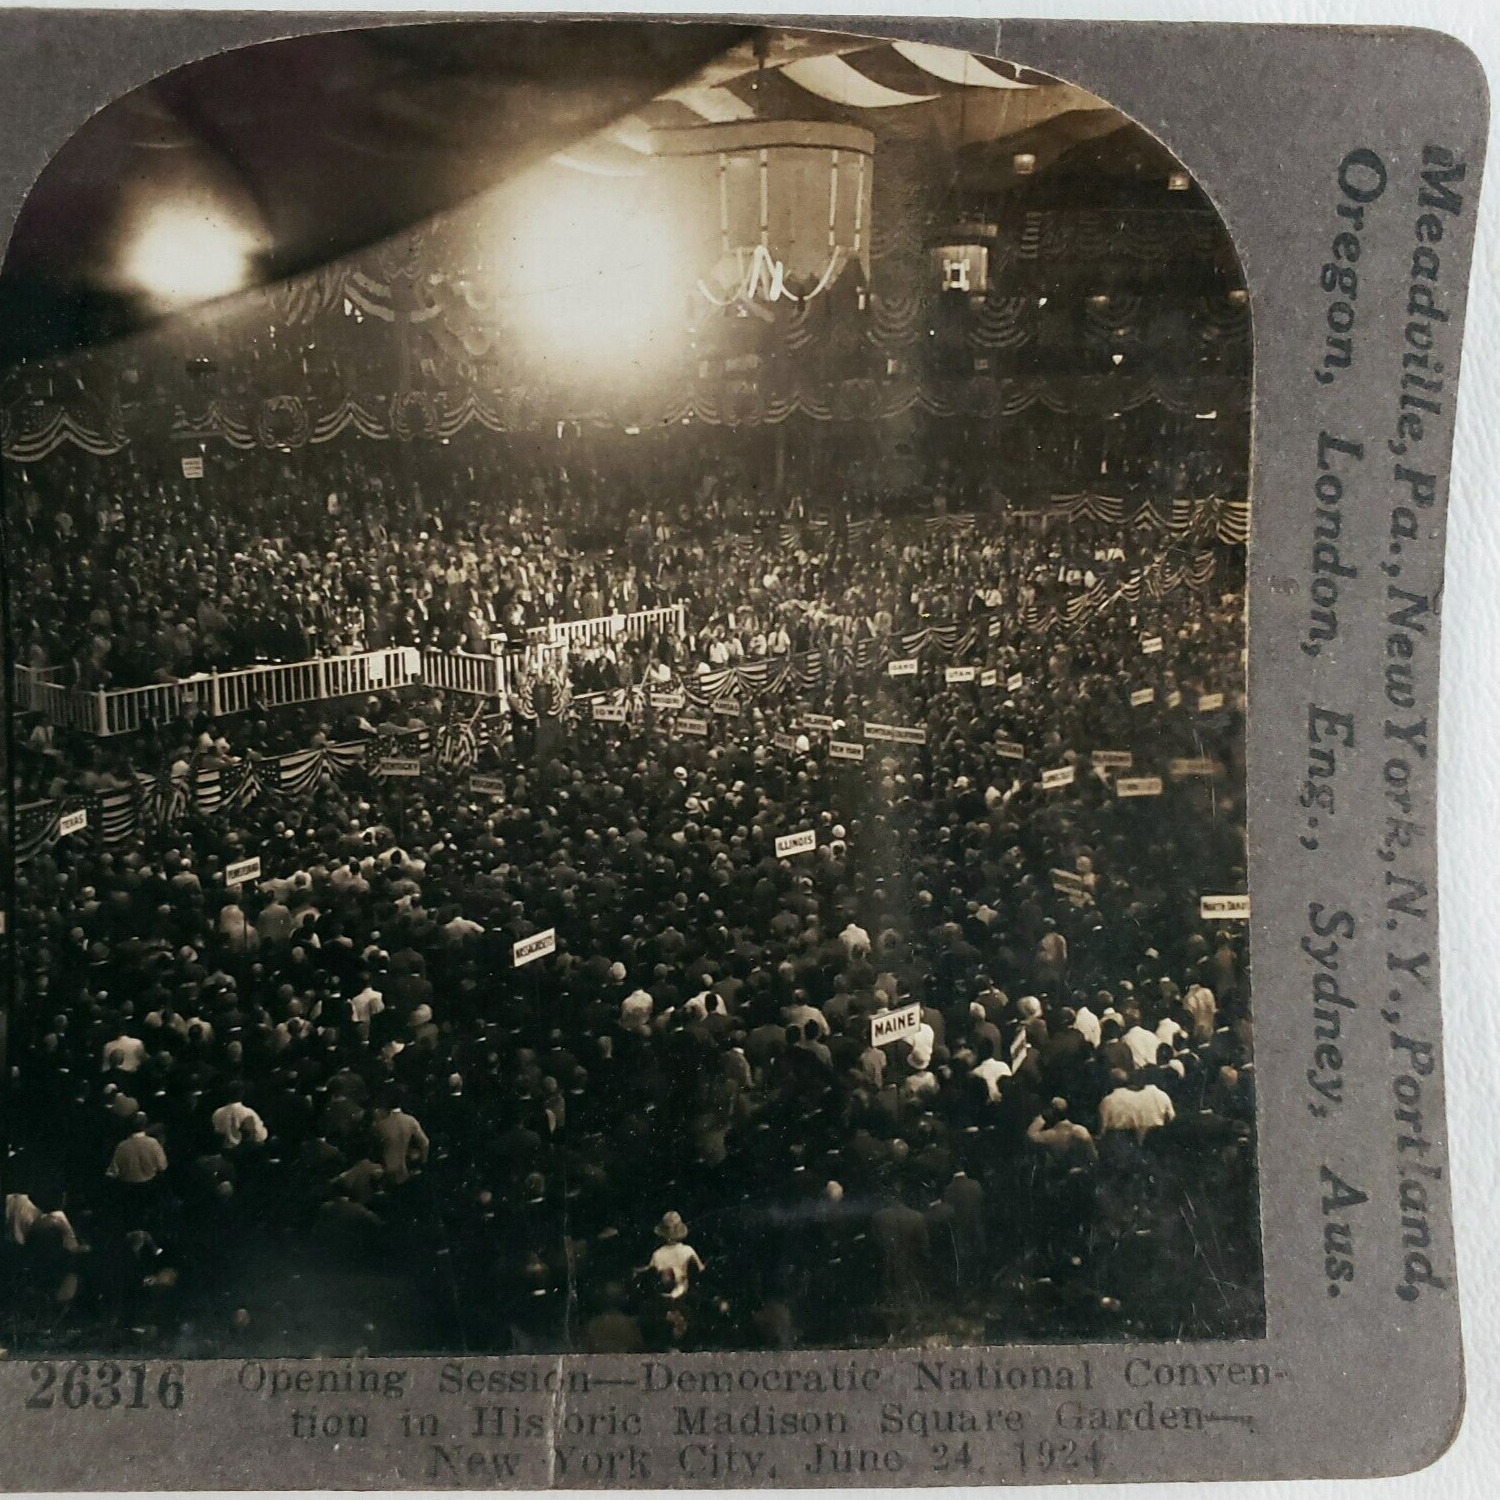 Democratic National Convention Stereoview 1924 Madison Square Garden NYC C1619